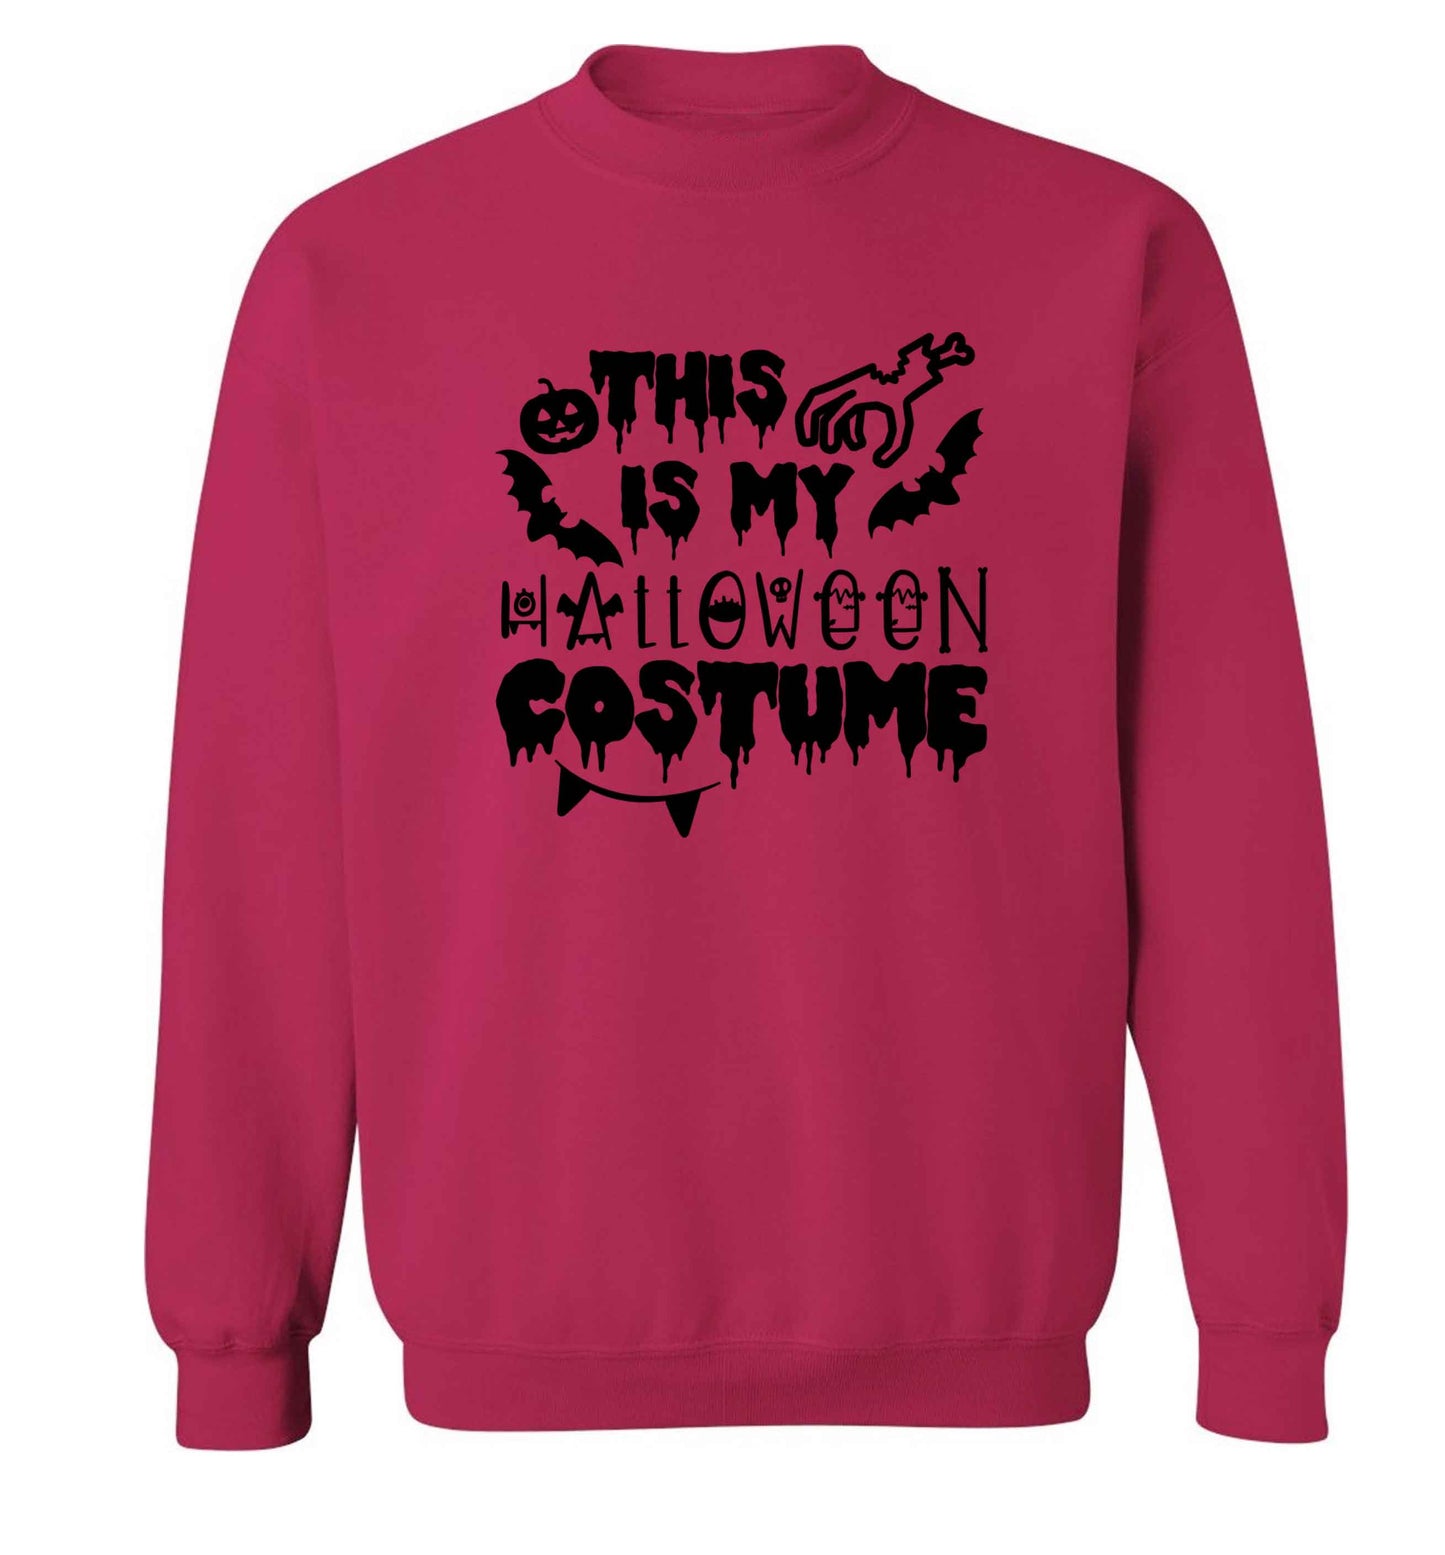 This is my halloween costume adult's unisex pink sweater 2XL